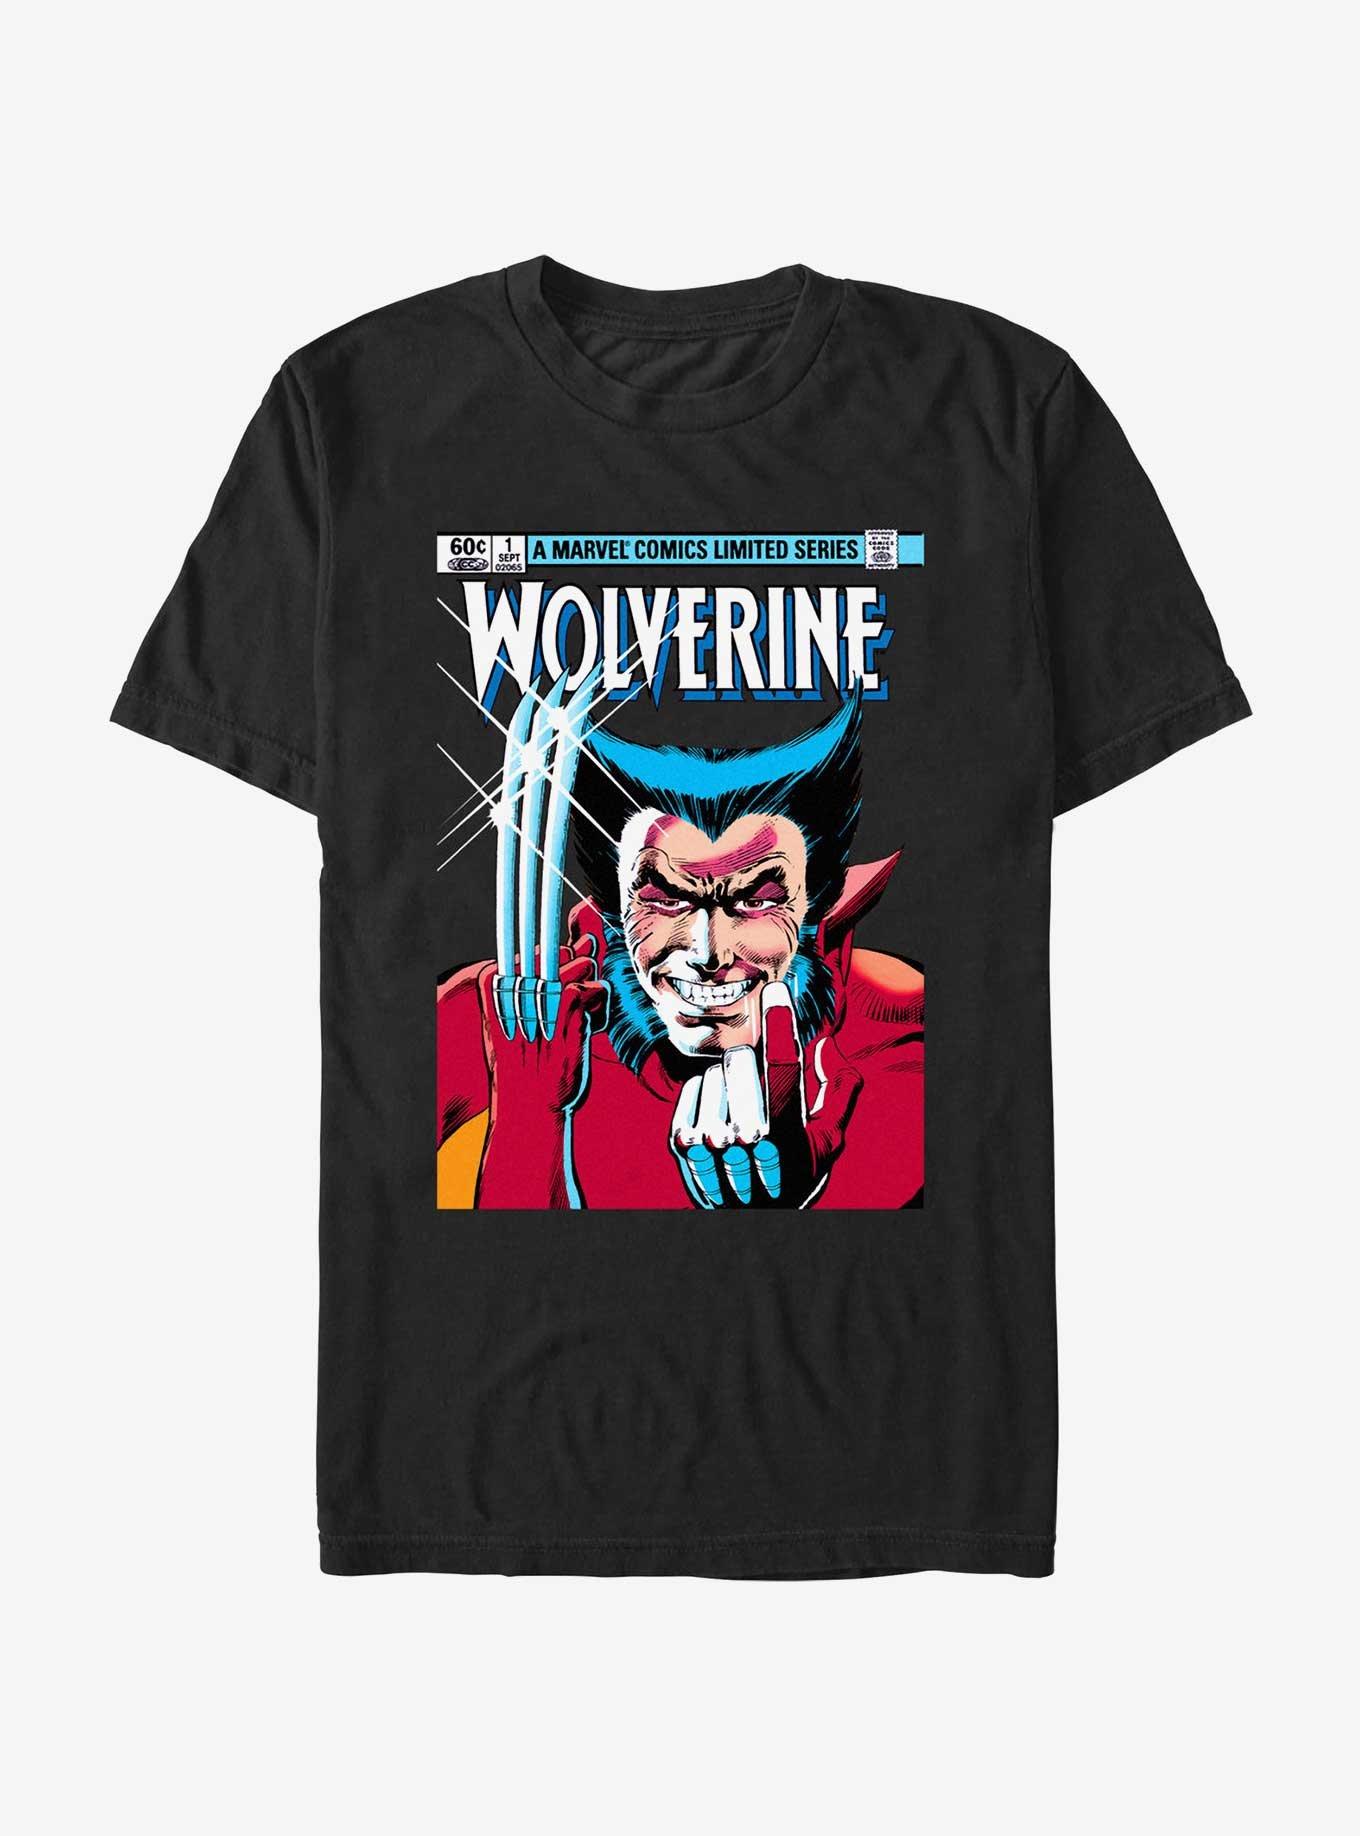 Wolverine 1st Issue Comic Cover T-Shirt, BLACK, hi-res